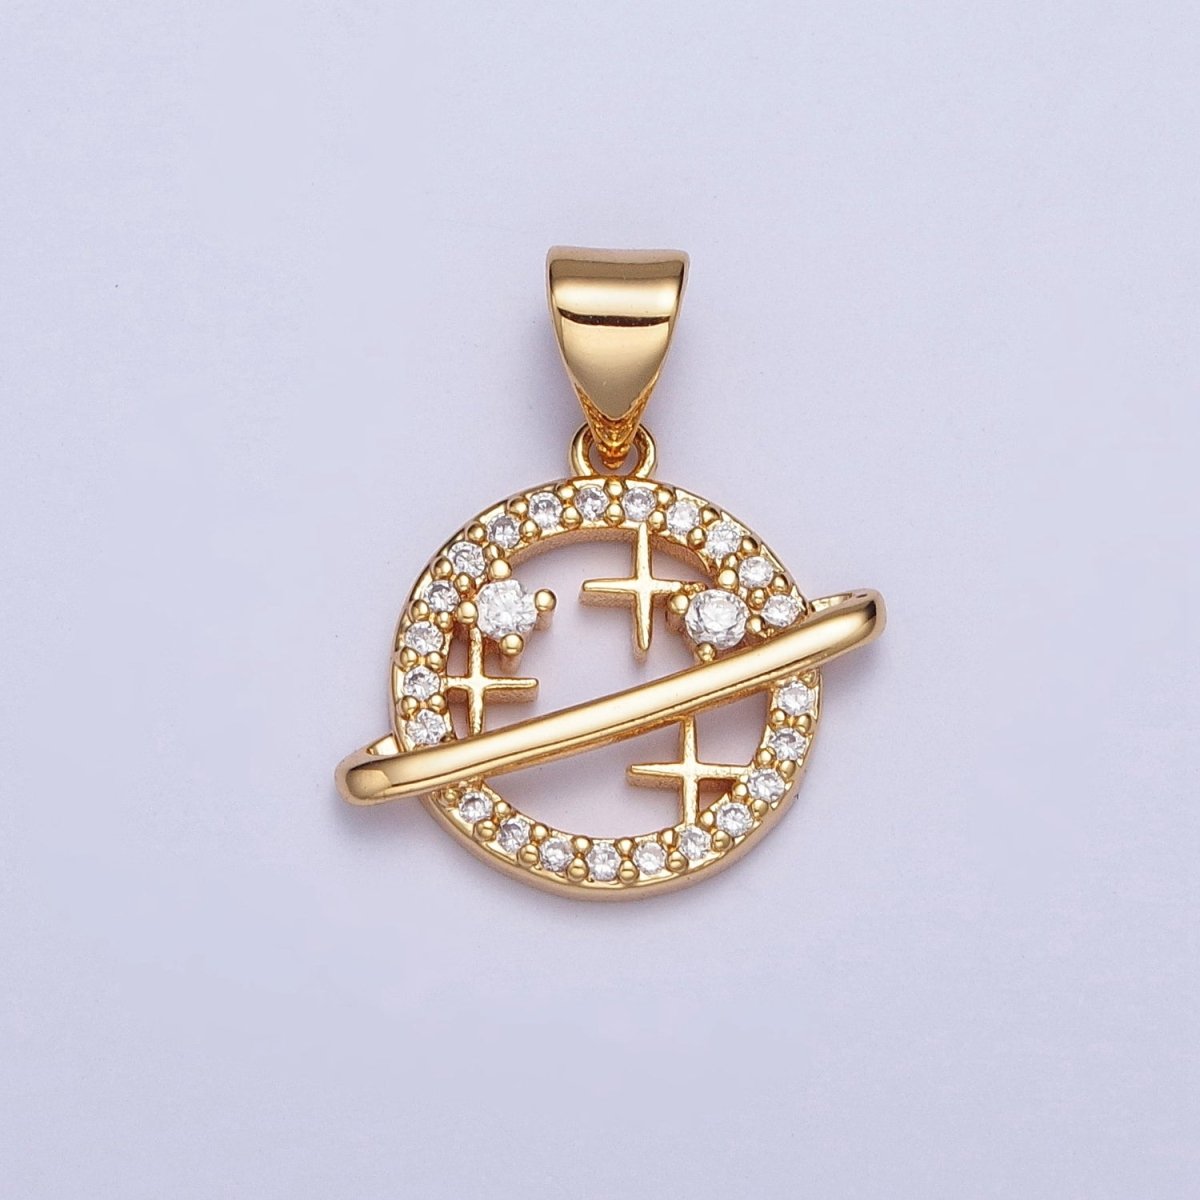 24K Gold Filled Micro Pave Celestial Star Space Planet Pendant For Necklace Making X-438 - DLUXCA